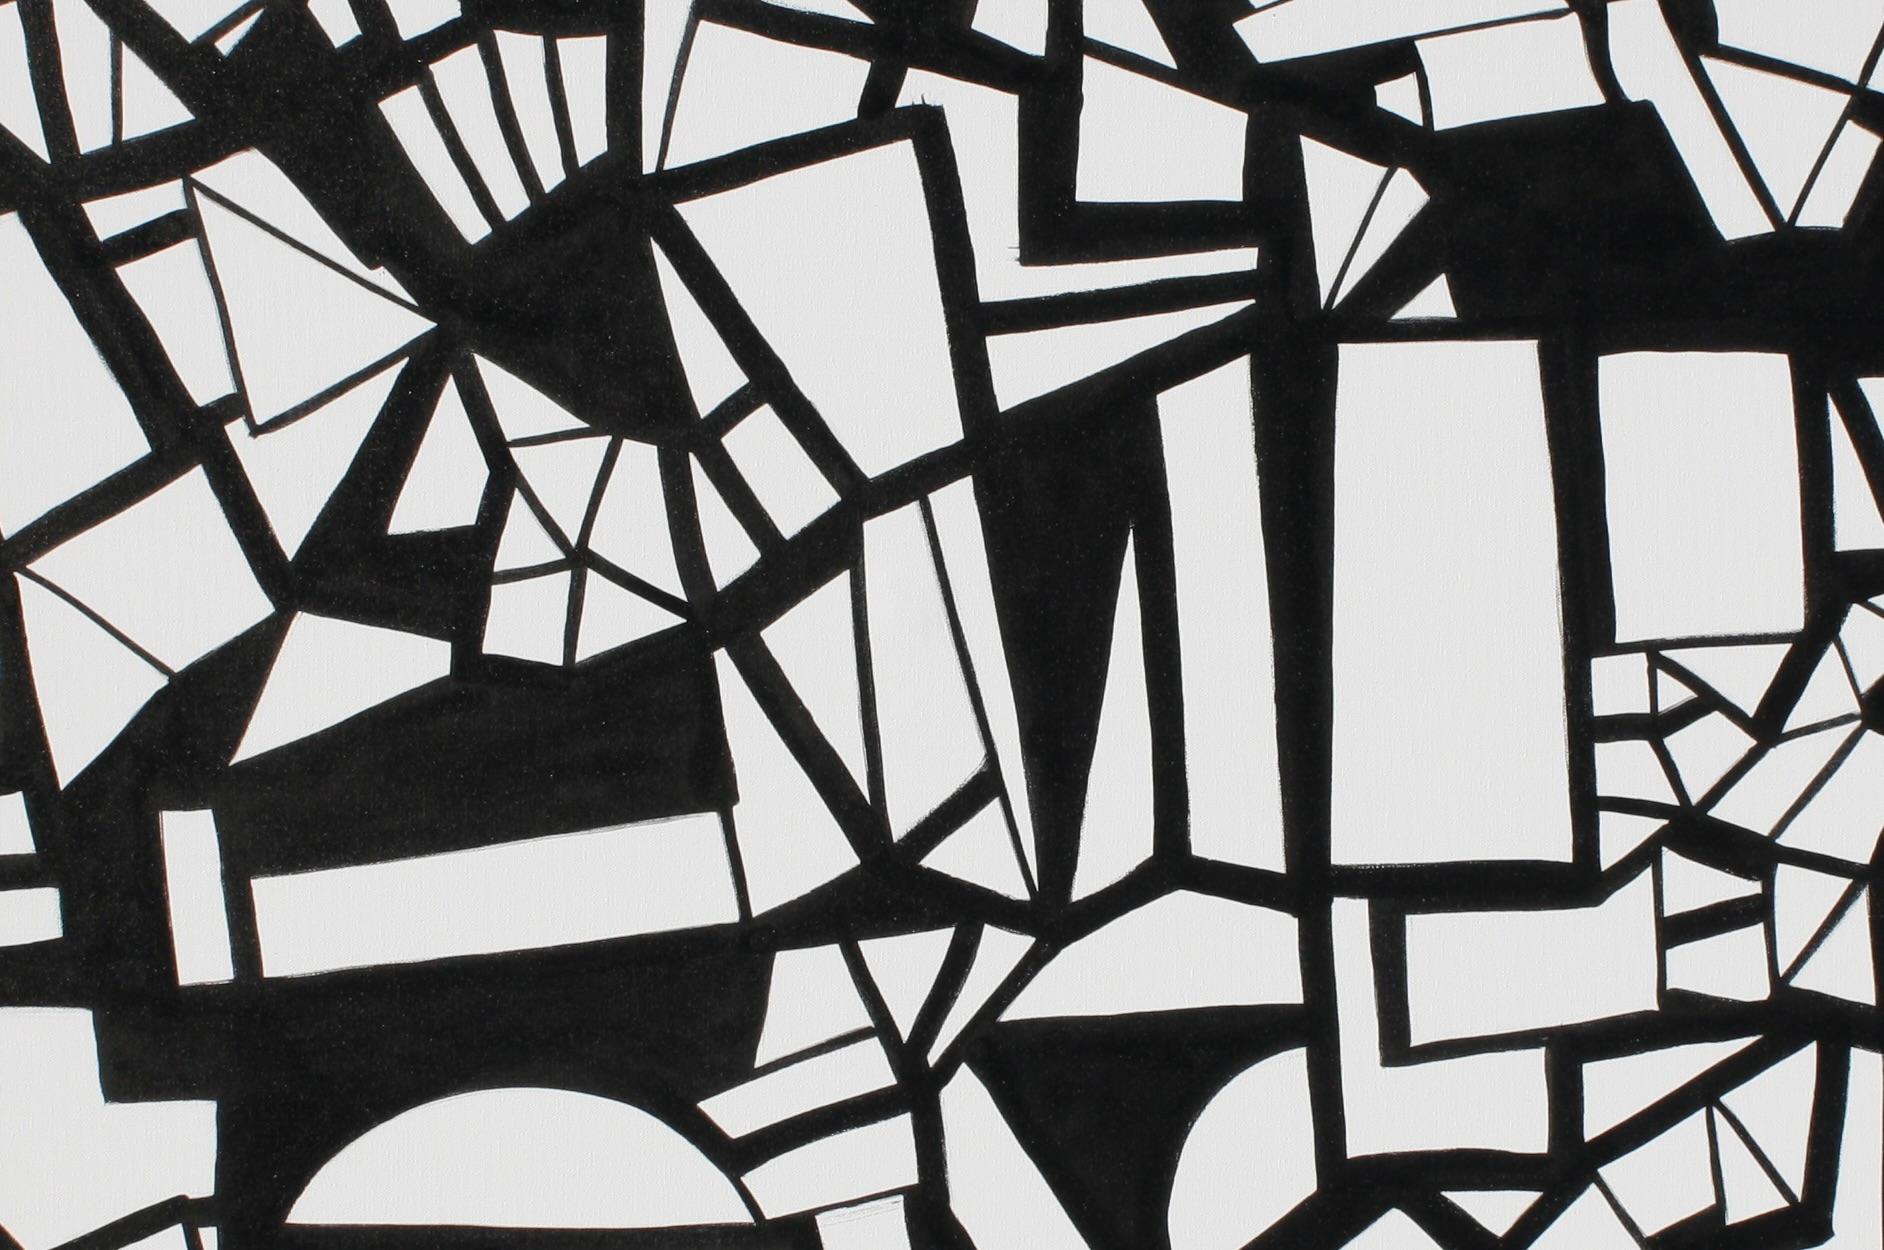 <p>Artist Comments<br>In this black-and-white abstract piece, the deliberate arrangement of diverse forms and colors gives rise to distinctive patterns. The non-representational quality of the visual elements within the composition invites